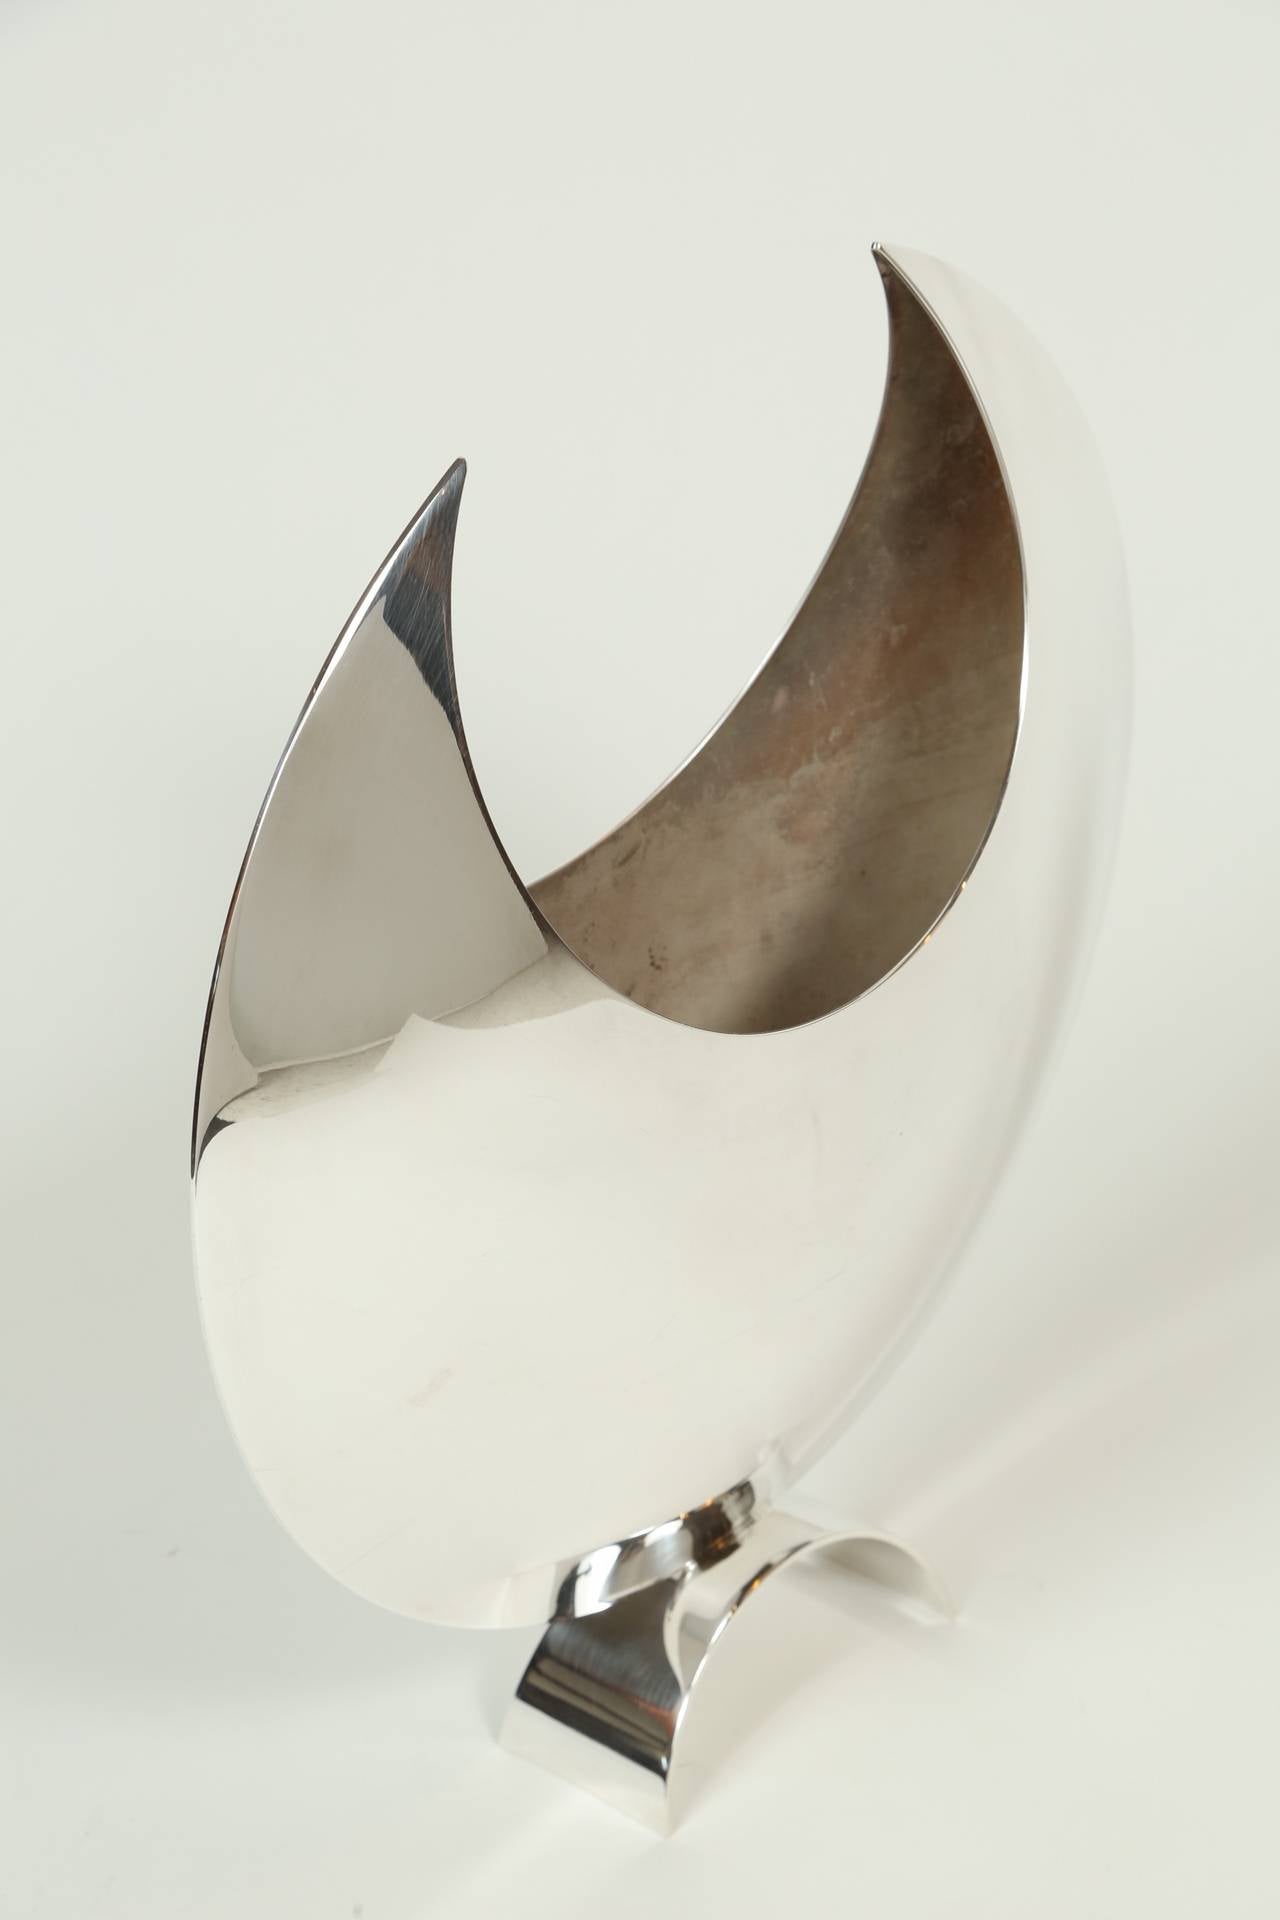 An elegant silver plate crescent moon shaped vase on an arched foot.